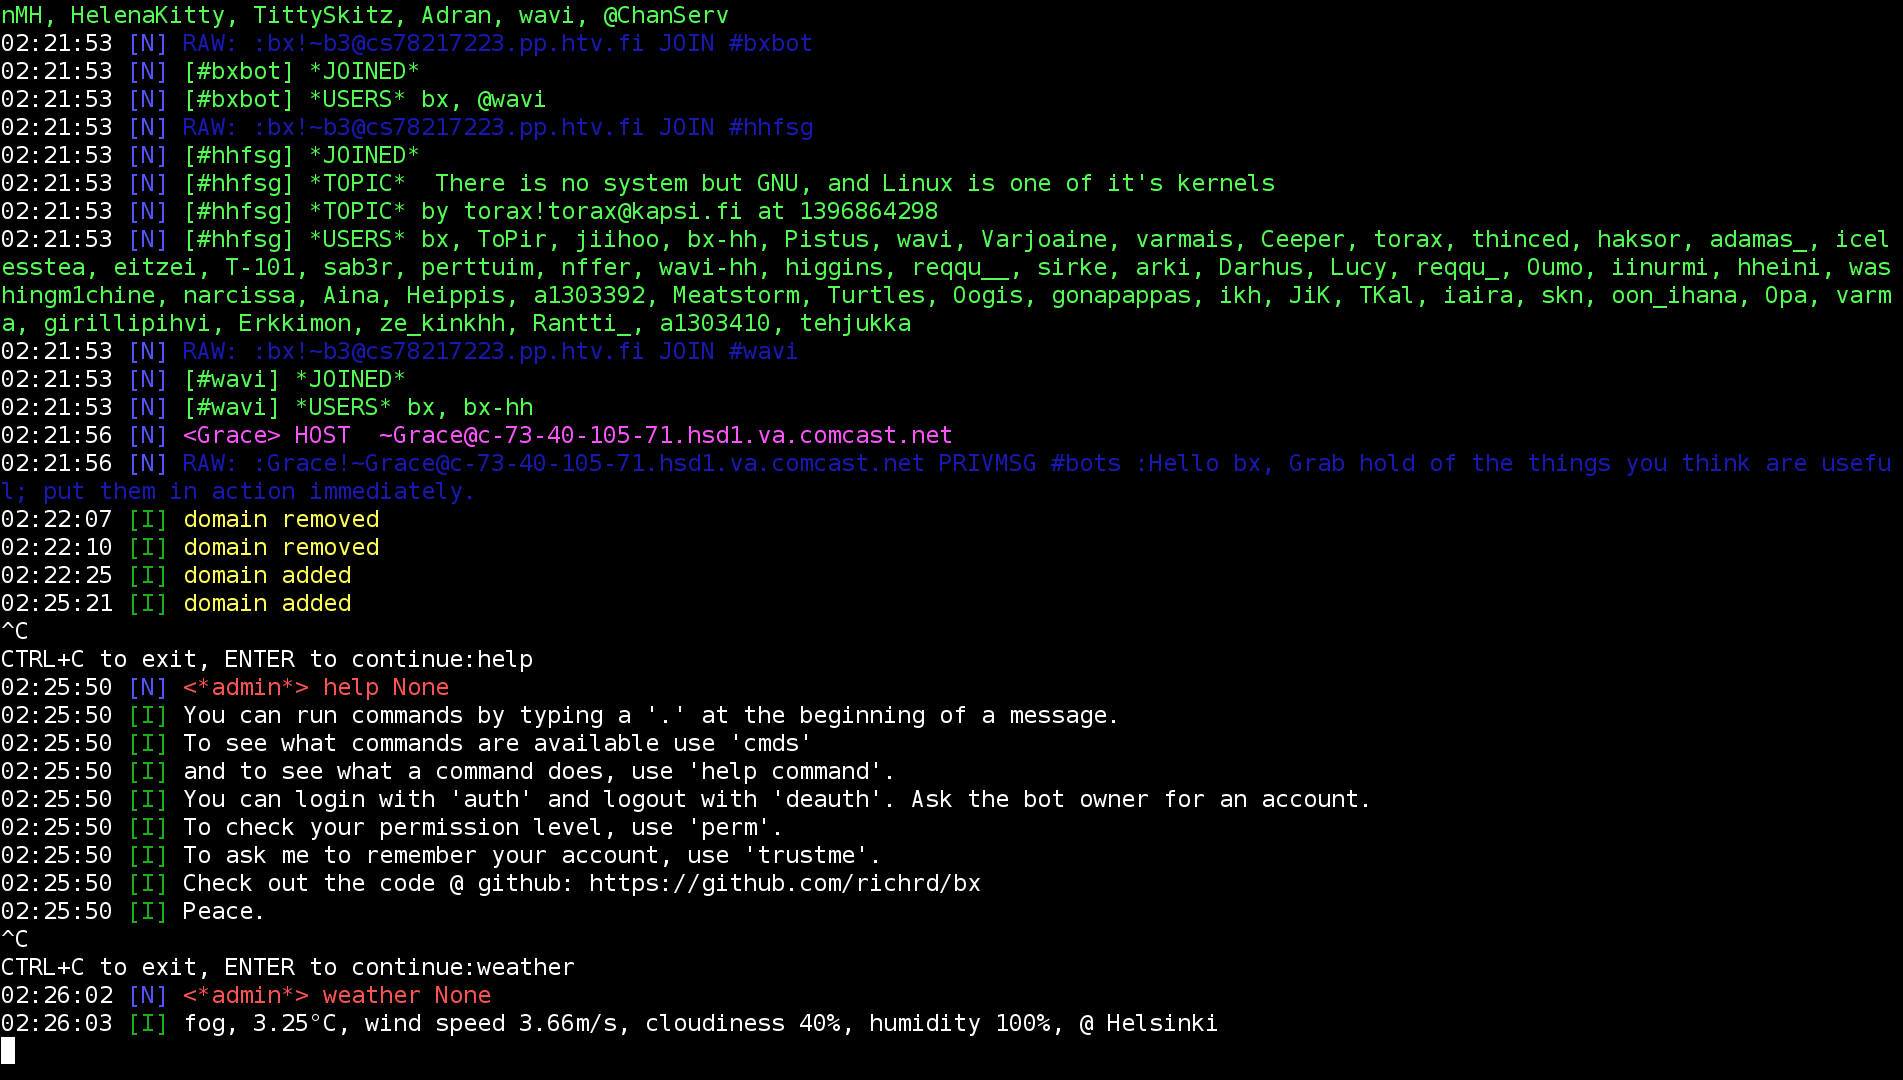 Command line view of the bot.